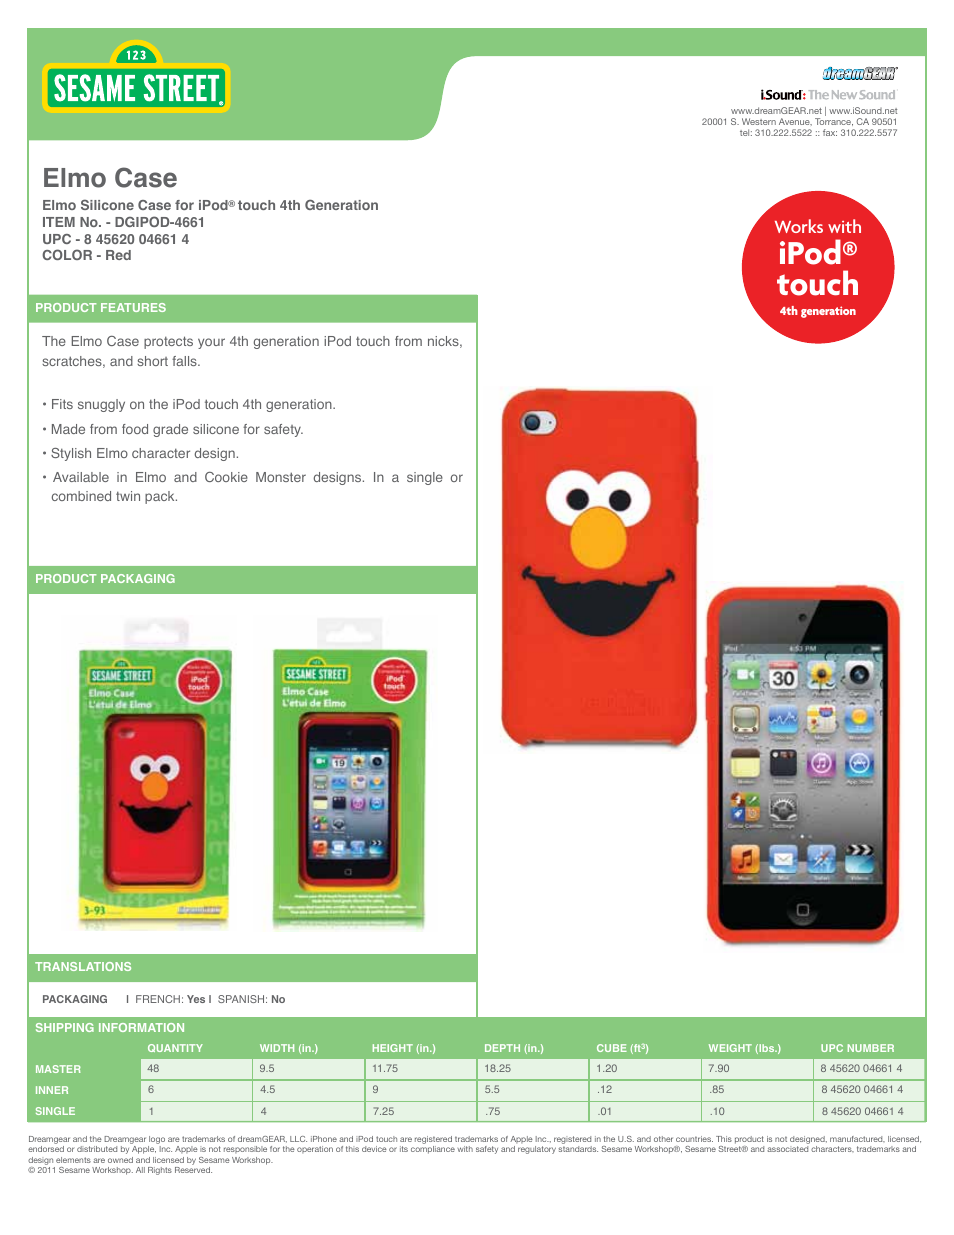 Elmo Case for iPod touch 4th Gen - Sell Sheet